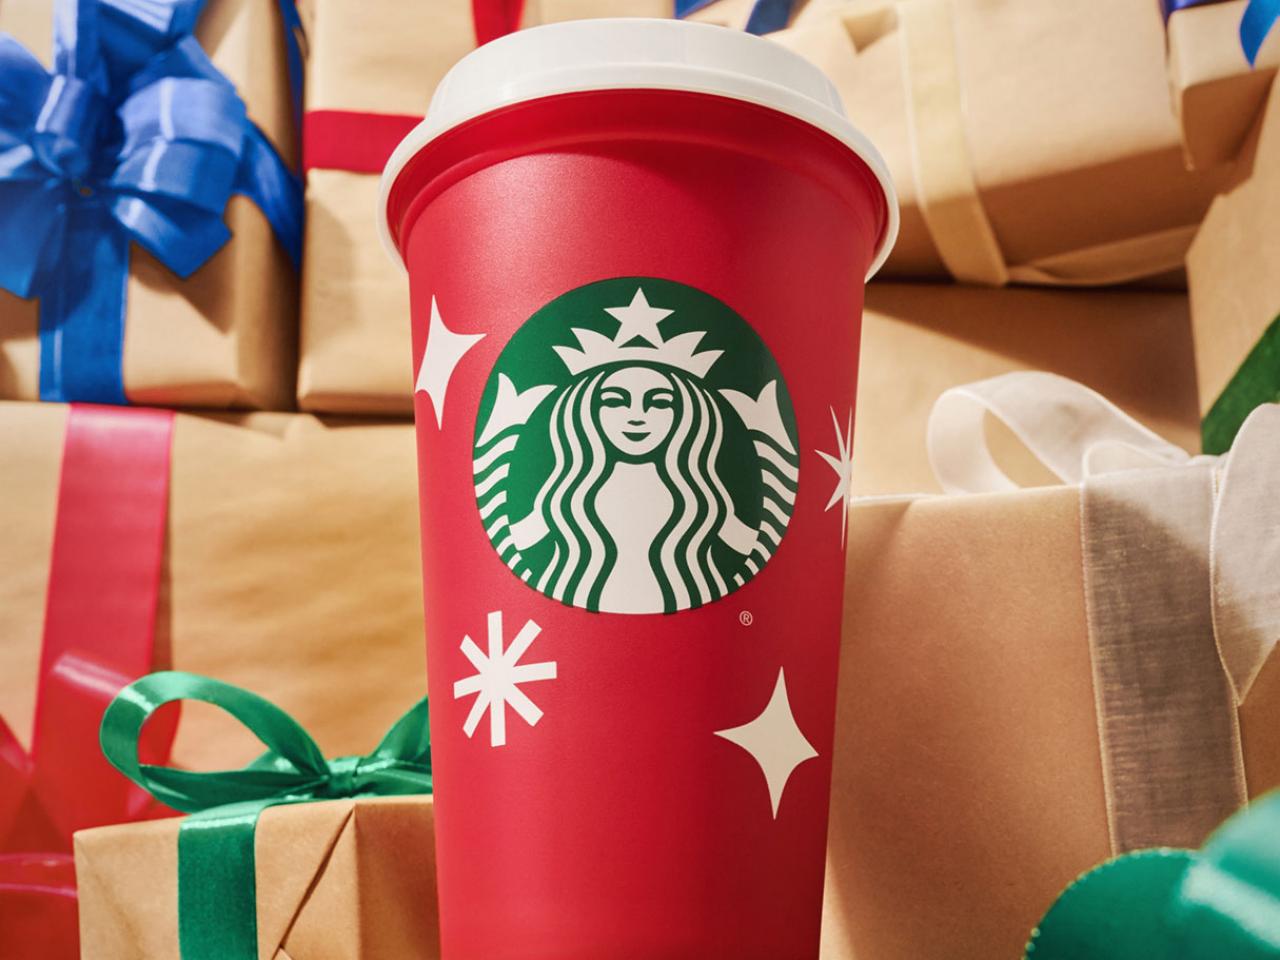 Top Starbucks Gifts! Find the best Starbucks presents for